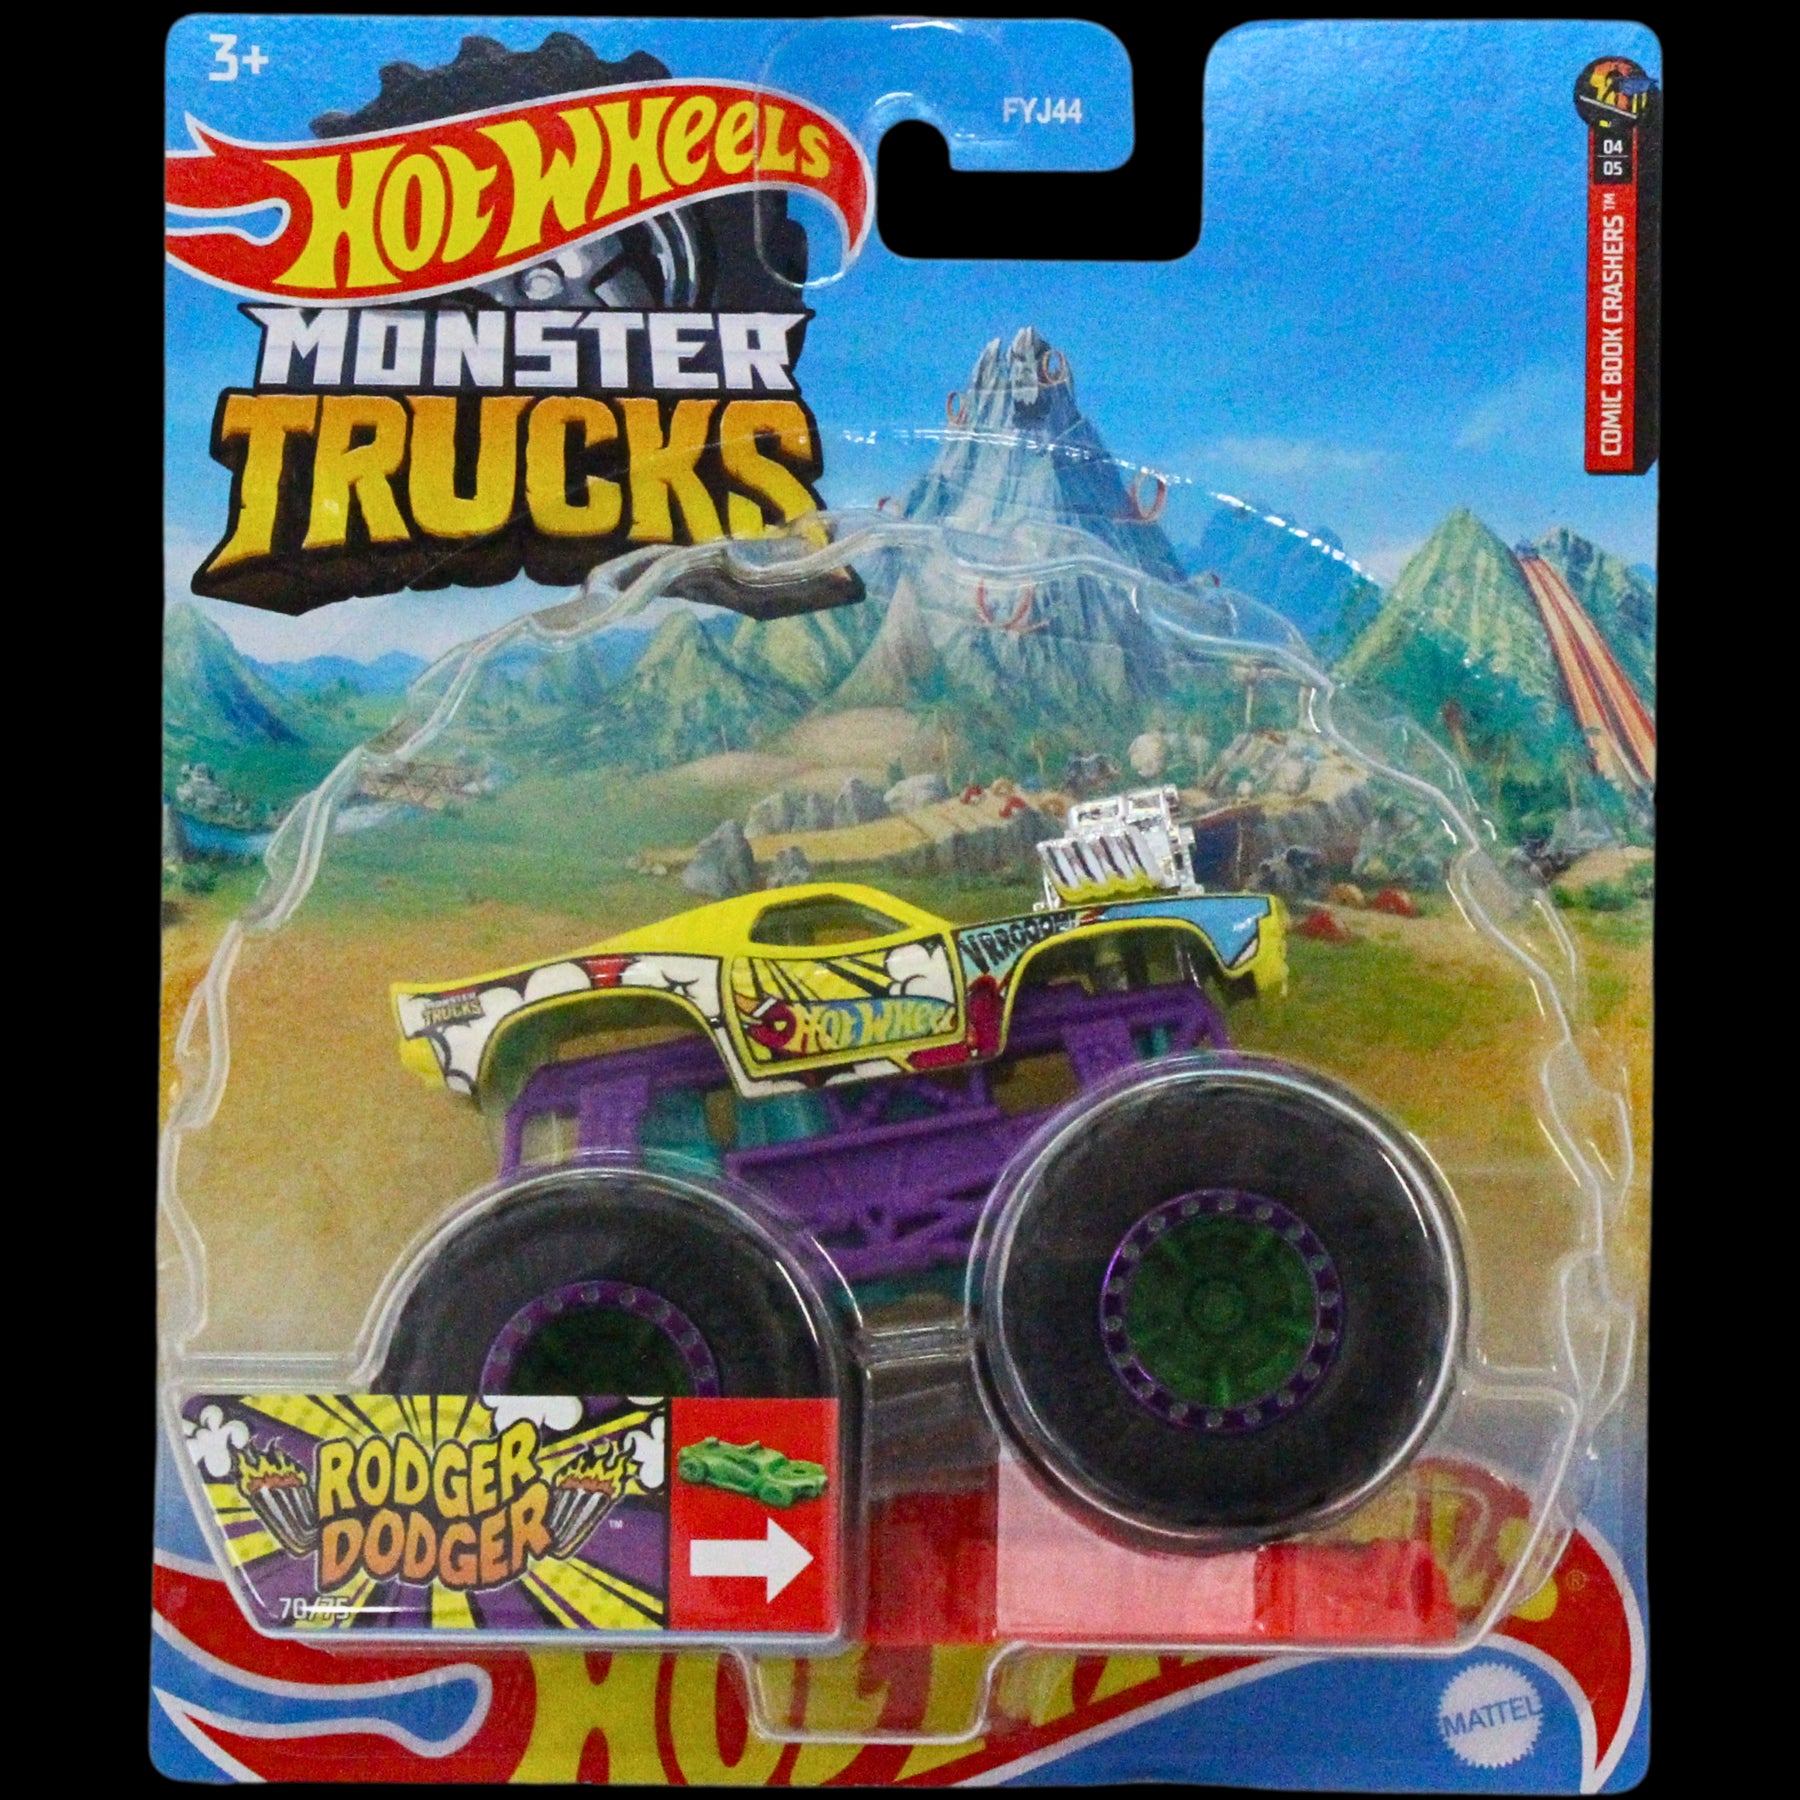 Hot Wheels Monster Trucks - 1:64 Scale Diecast - Rodger Dodger & Night Shifter - Twin Pack - Toptoys2u